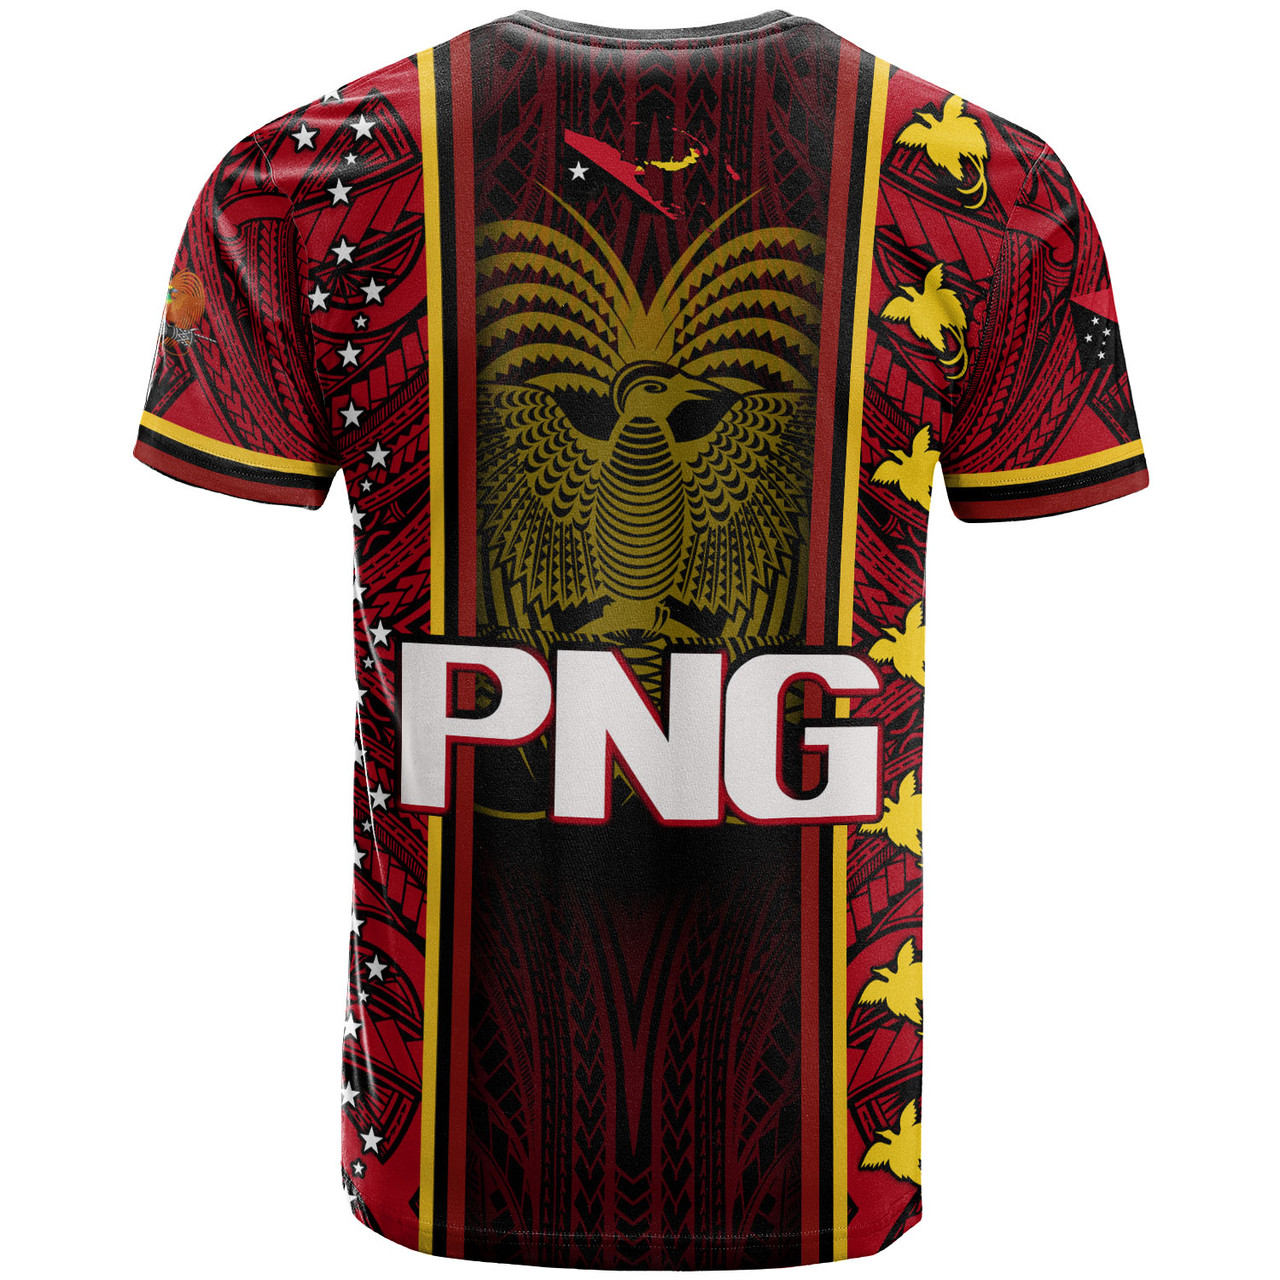 Papua New Guinea Custom Personalised T-Shirt - Seal And Map Tribal Traditional Patterns